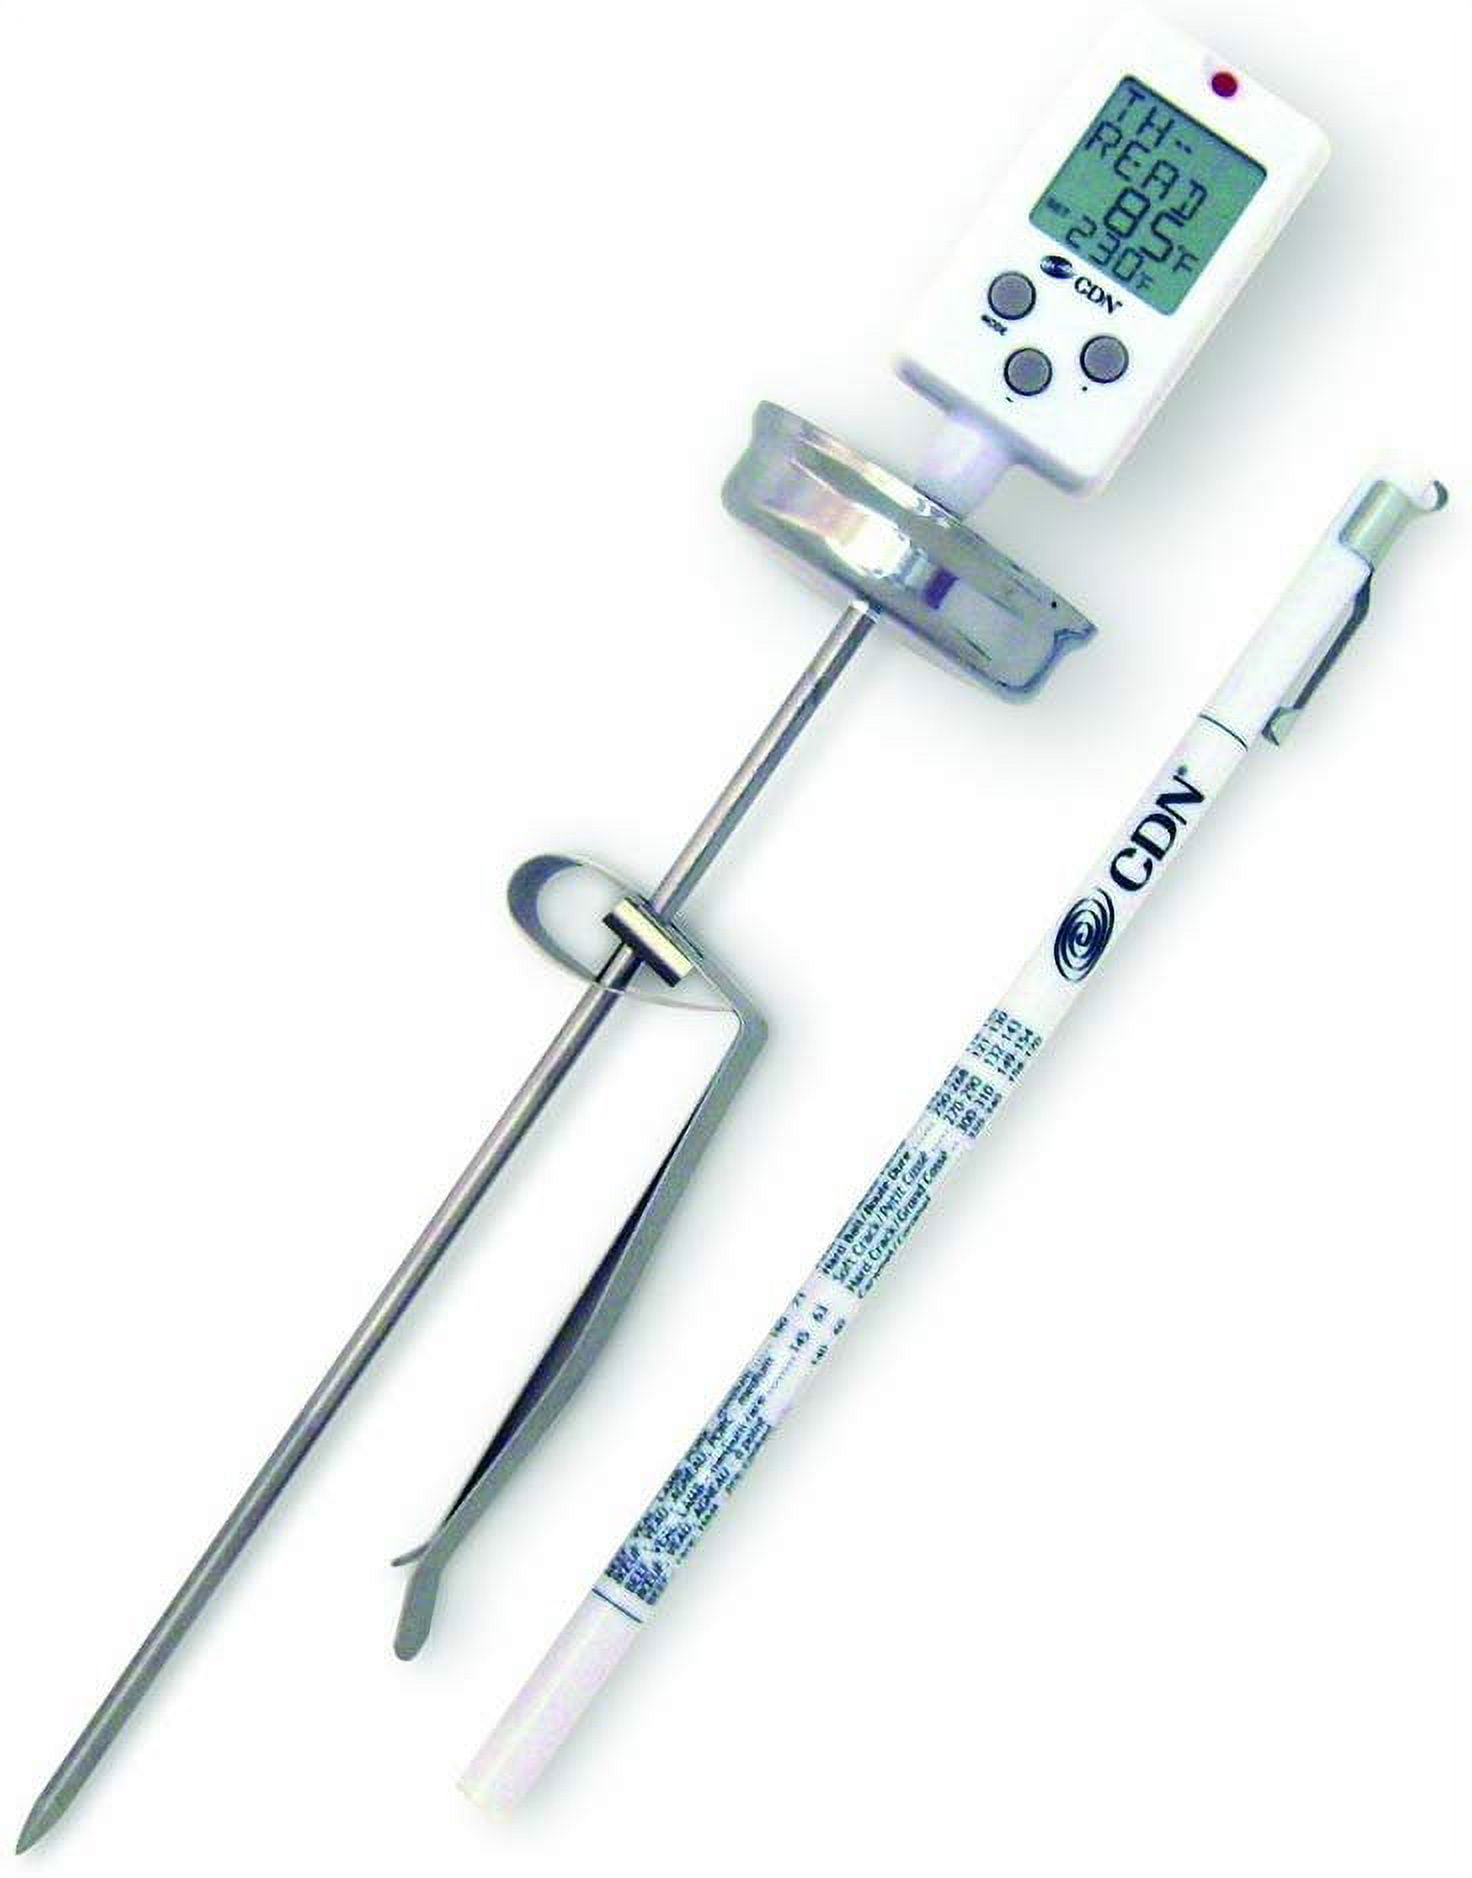 CDN DTC450 Digital Candy/Deep Fry/Pre-Programmed & Programmable  Thermometer, White, 10.4